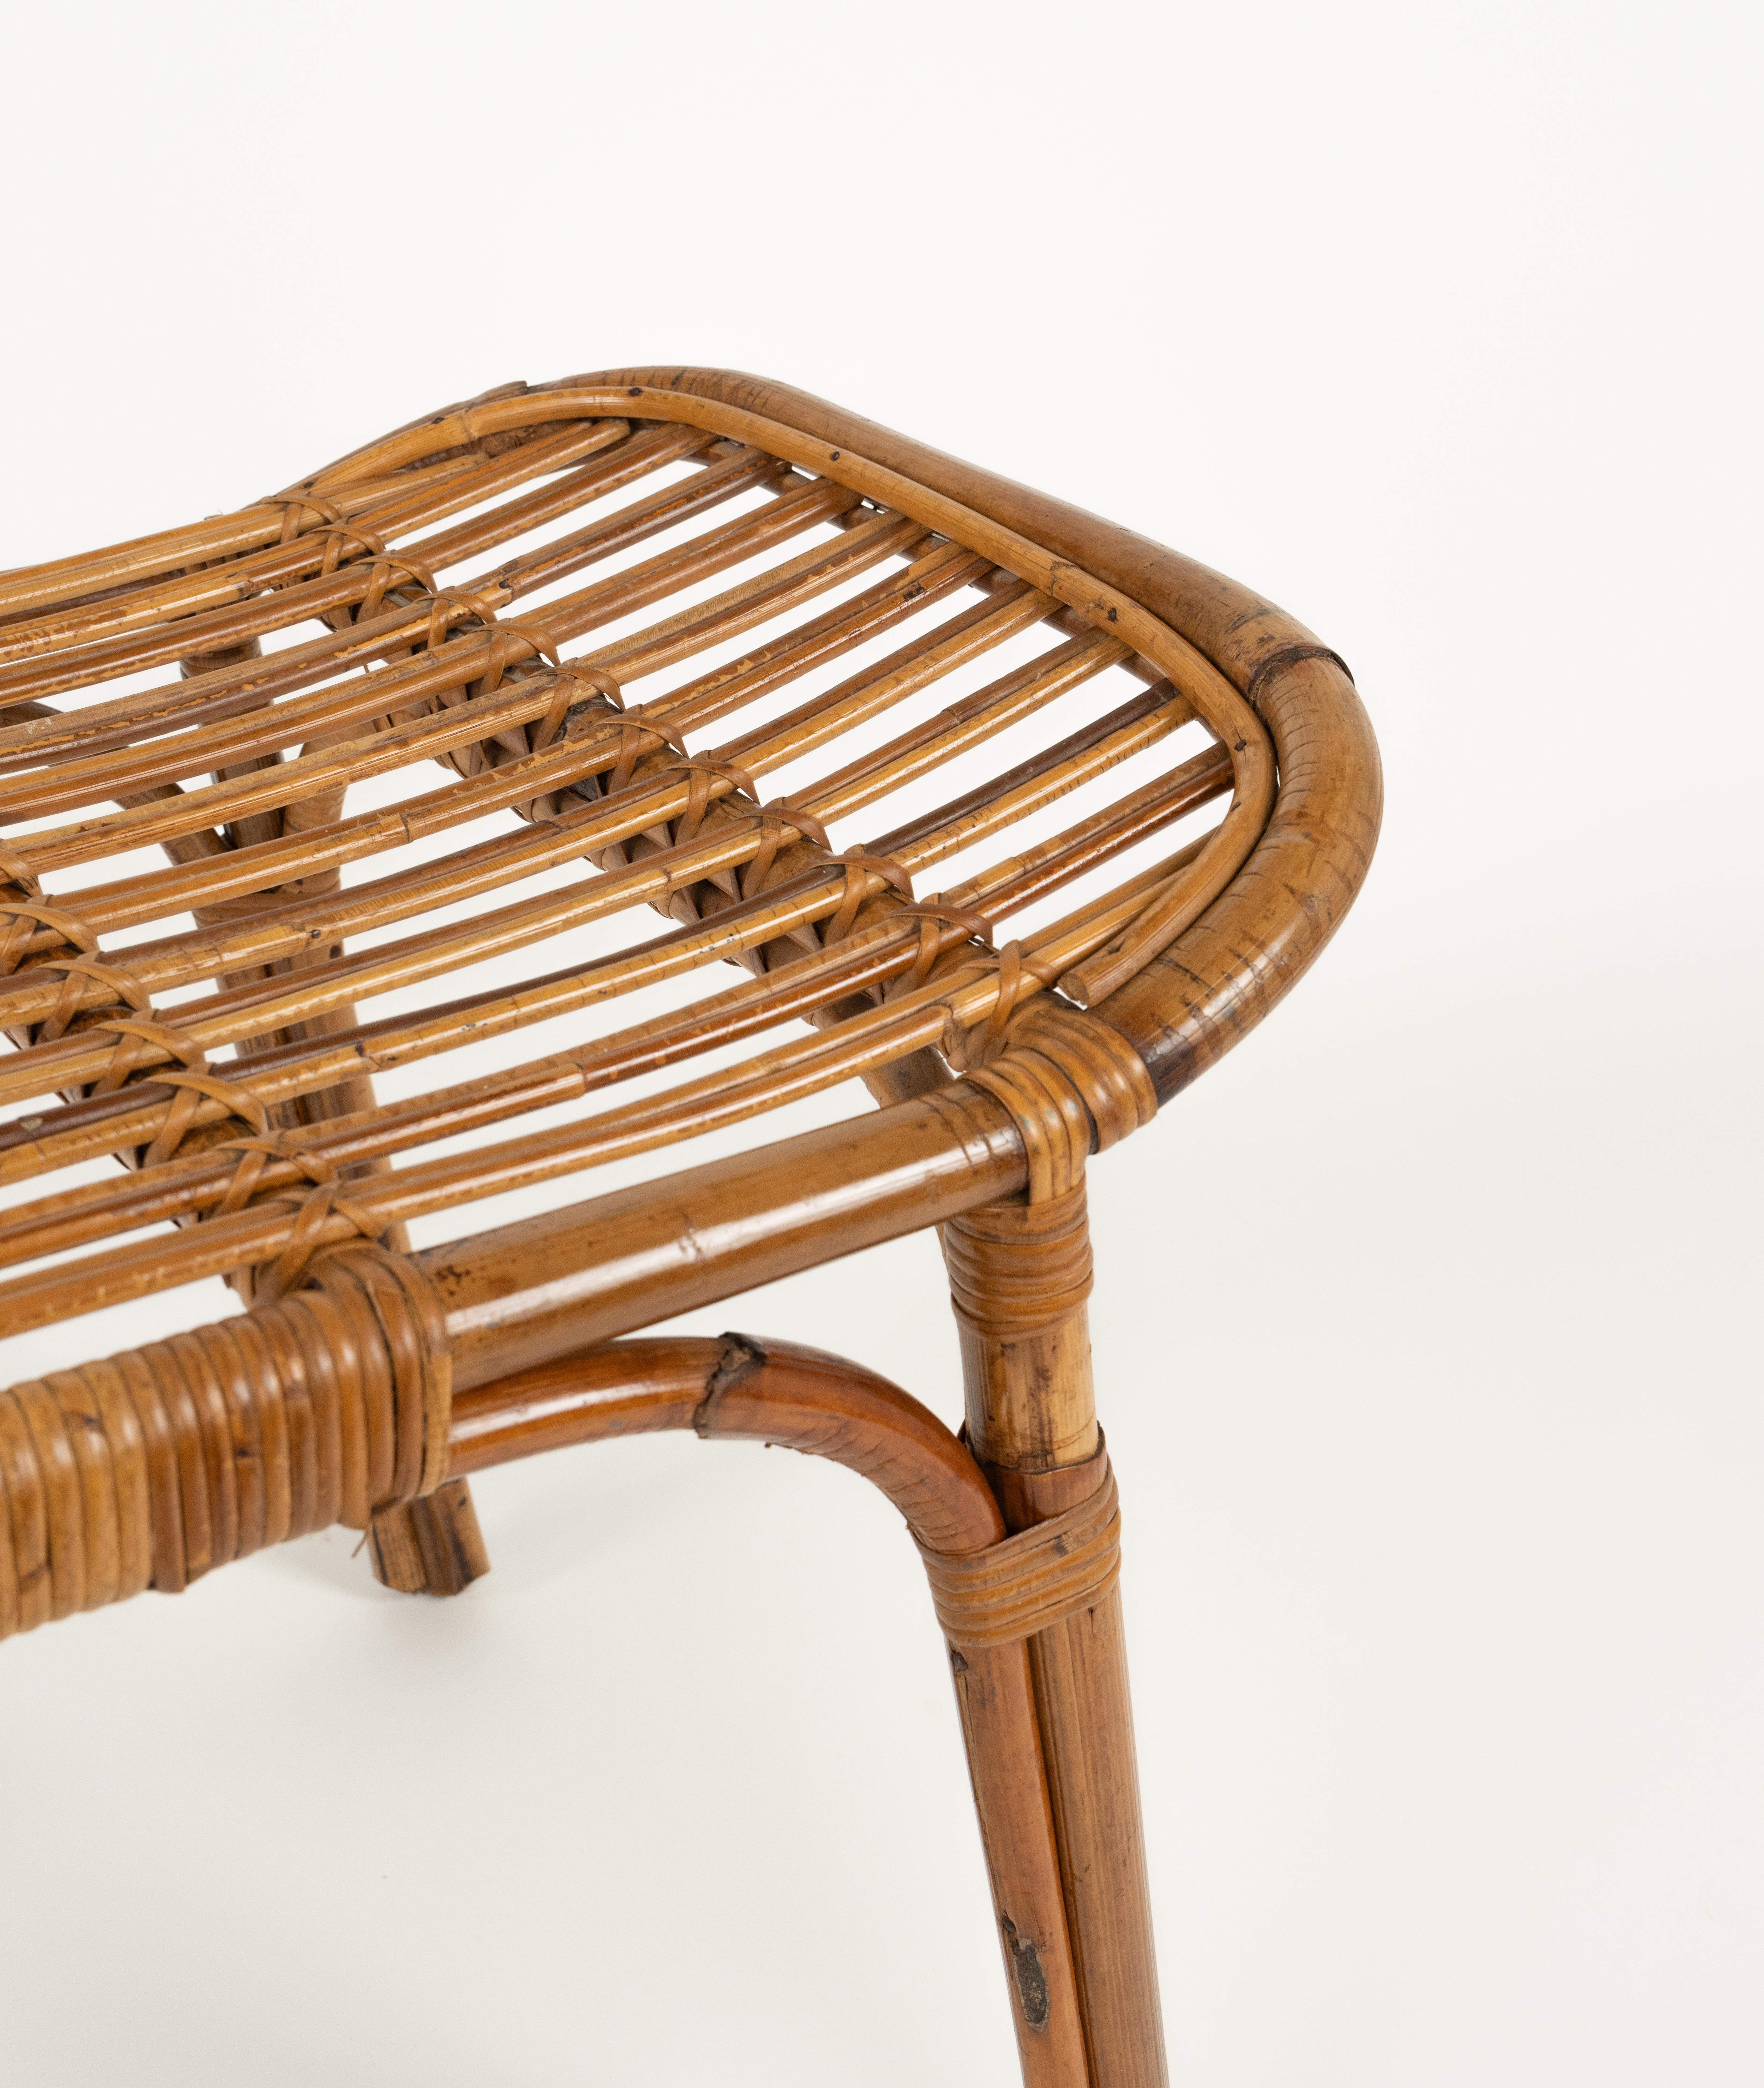 Midcentury Bench or Side Table in Rattan & Bamboo Tito Agnoli Style, Italy 1960s For Sale 9